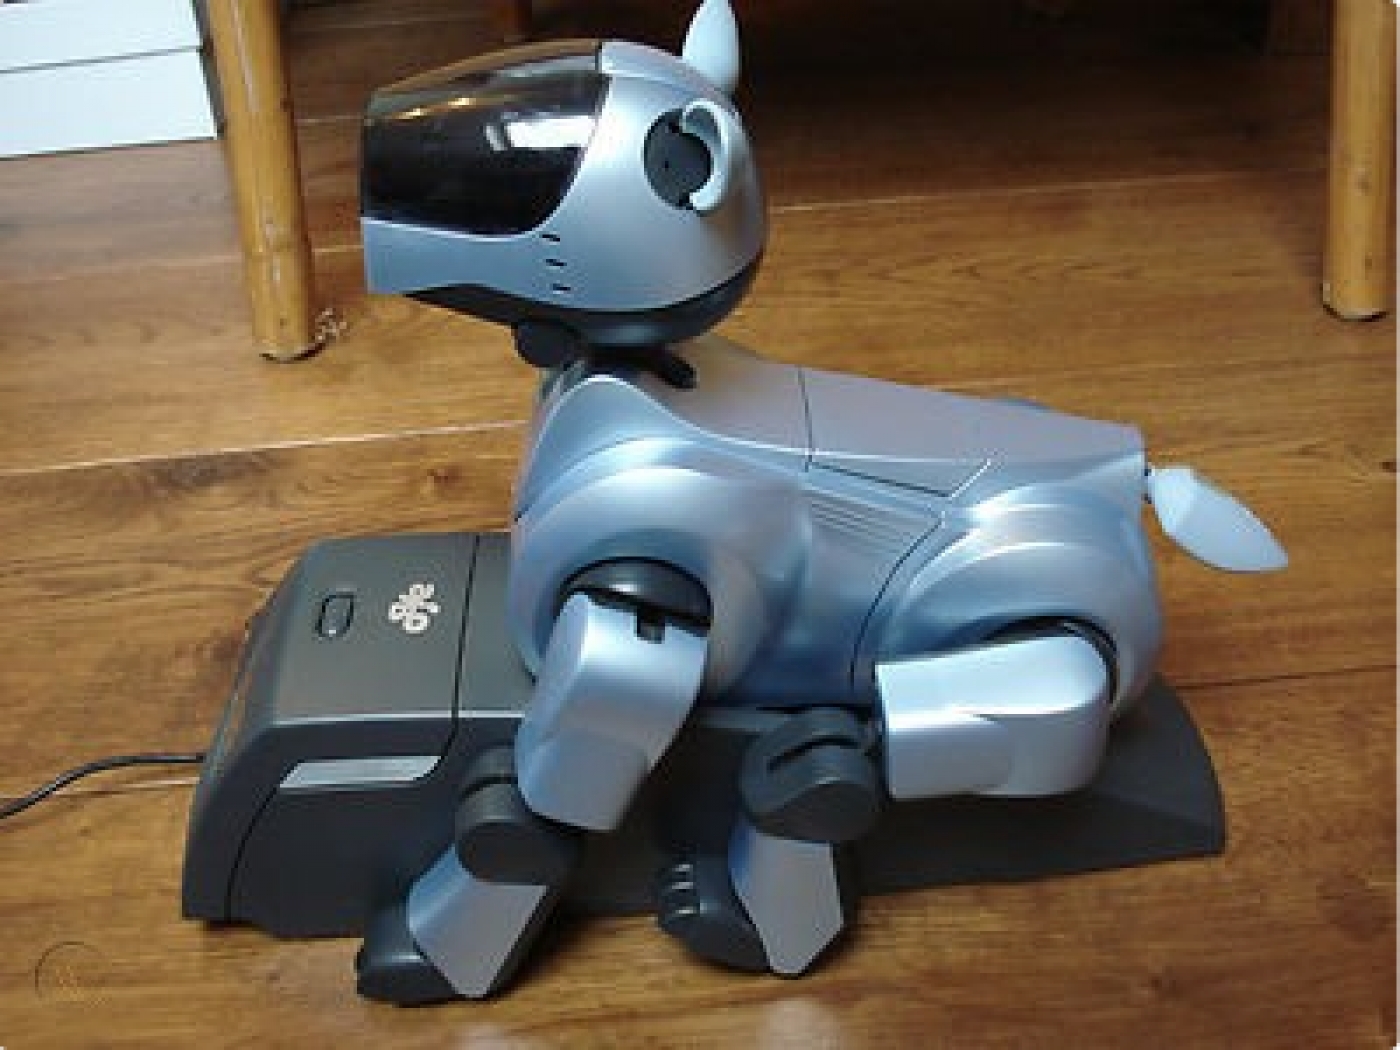 Aibo ERS-210 DHS - Droopy Head Syndrome